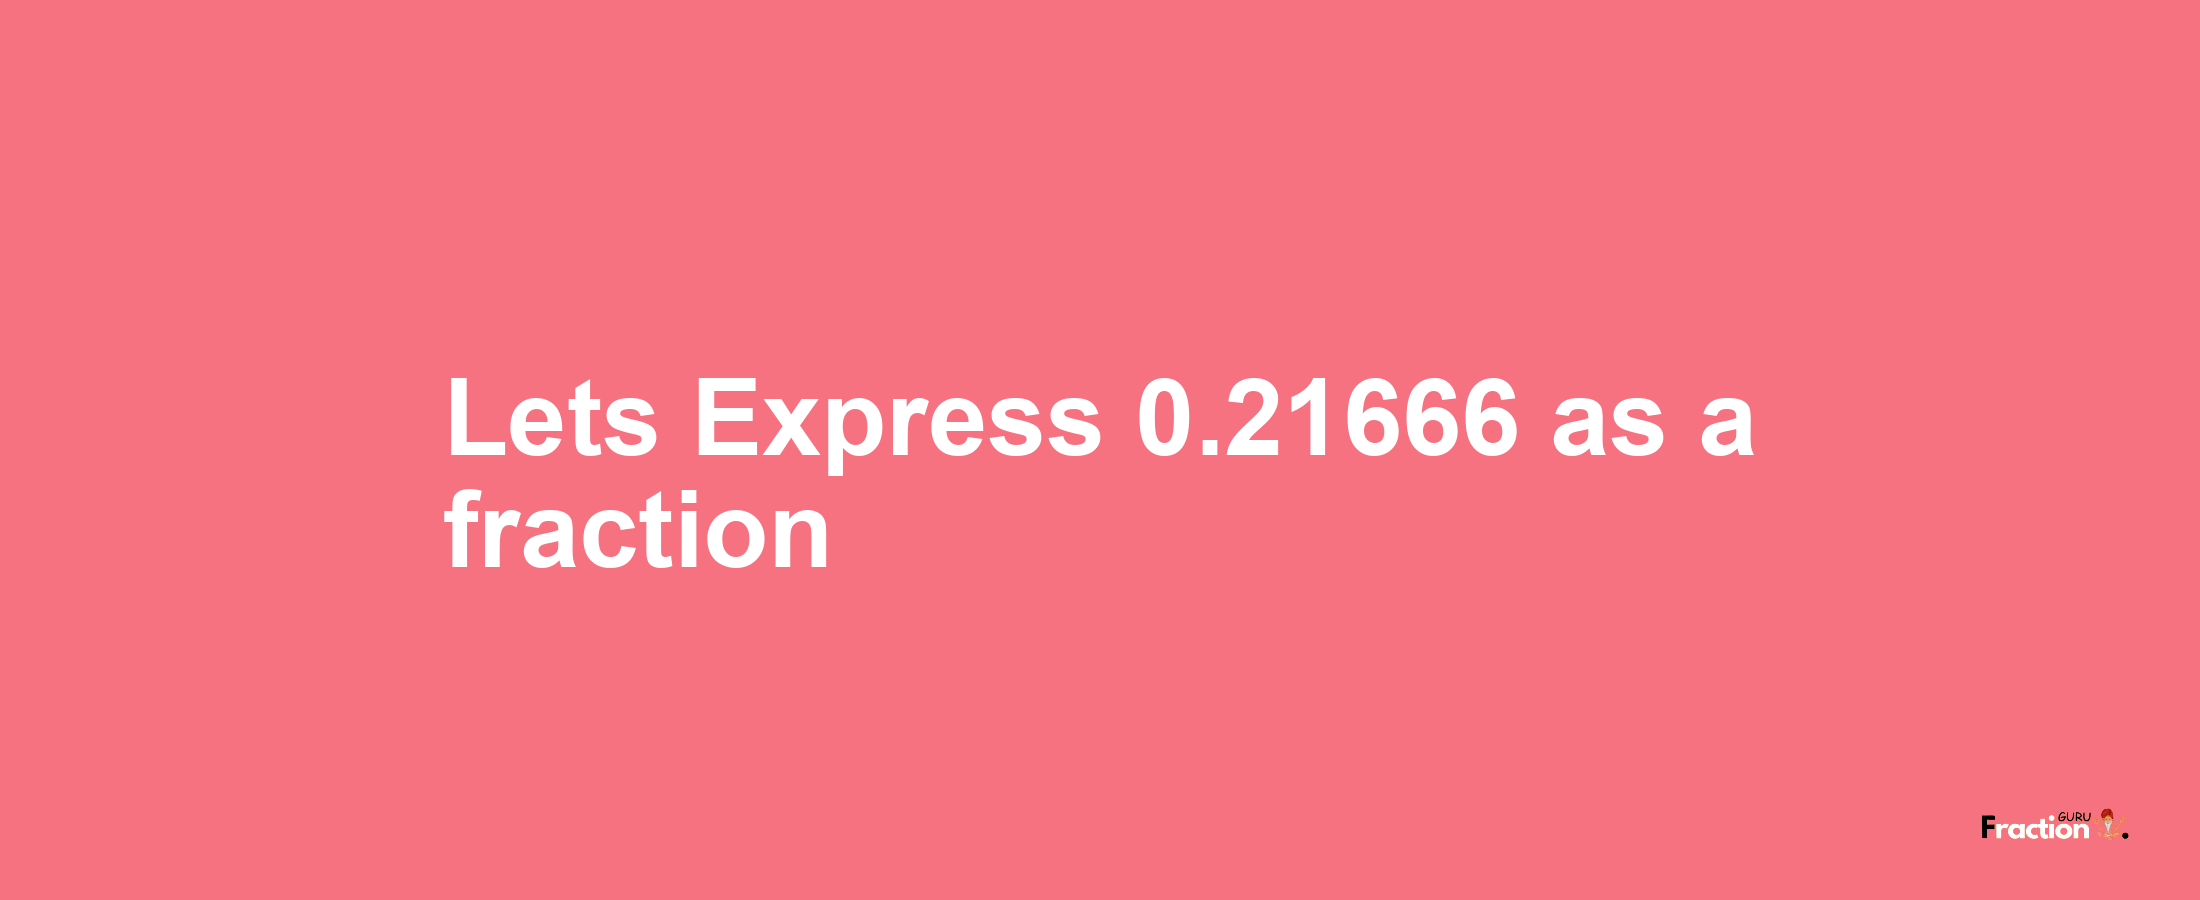 Lets Express 0.21666 as afraction